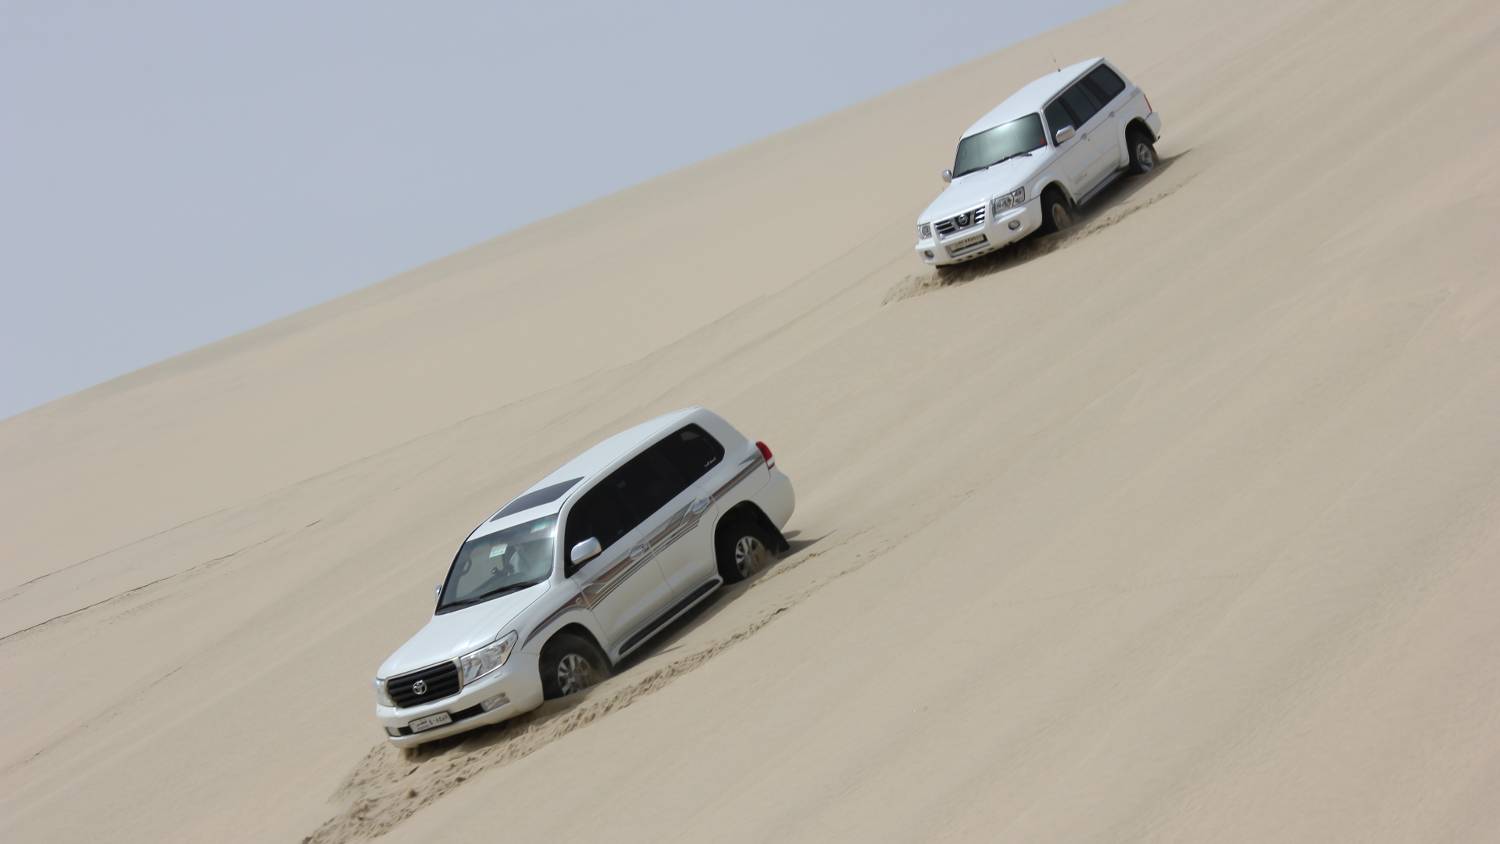 Vehicles descend towards Qatar's inland sea to spend time exploring the natural landscape (CC/Christine and Hagen Graf)